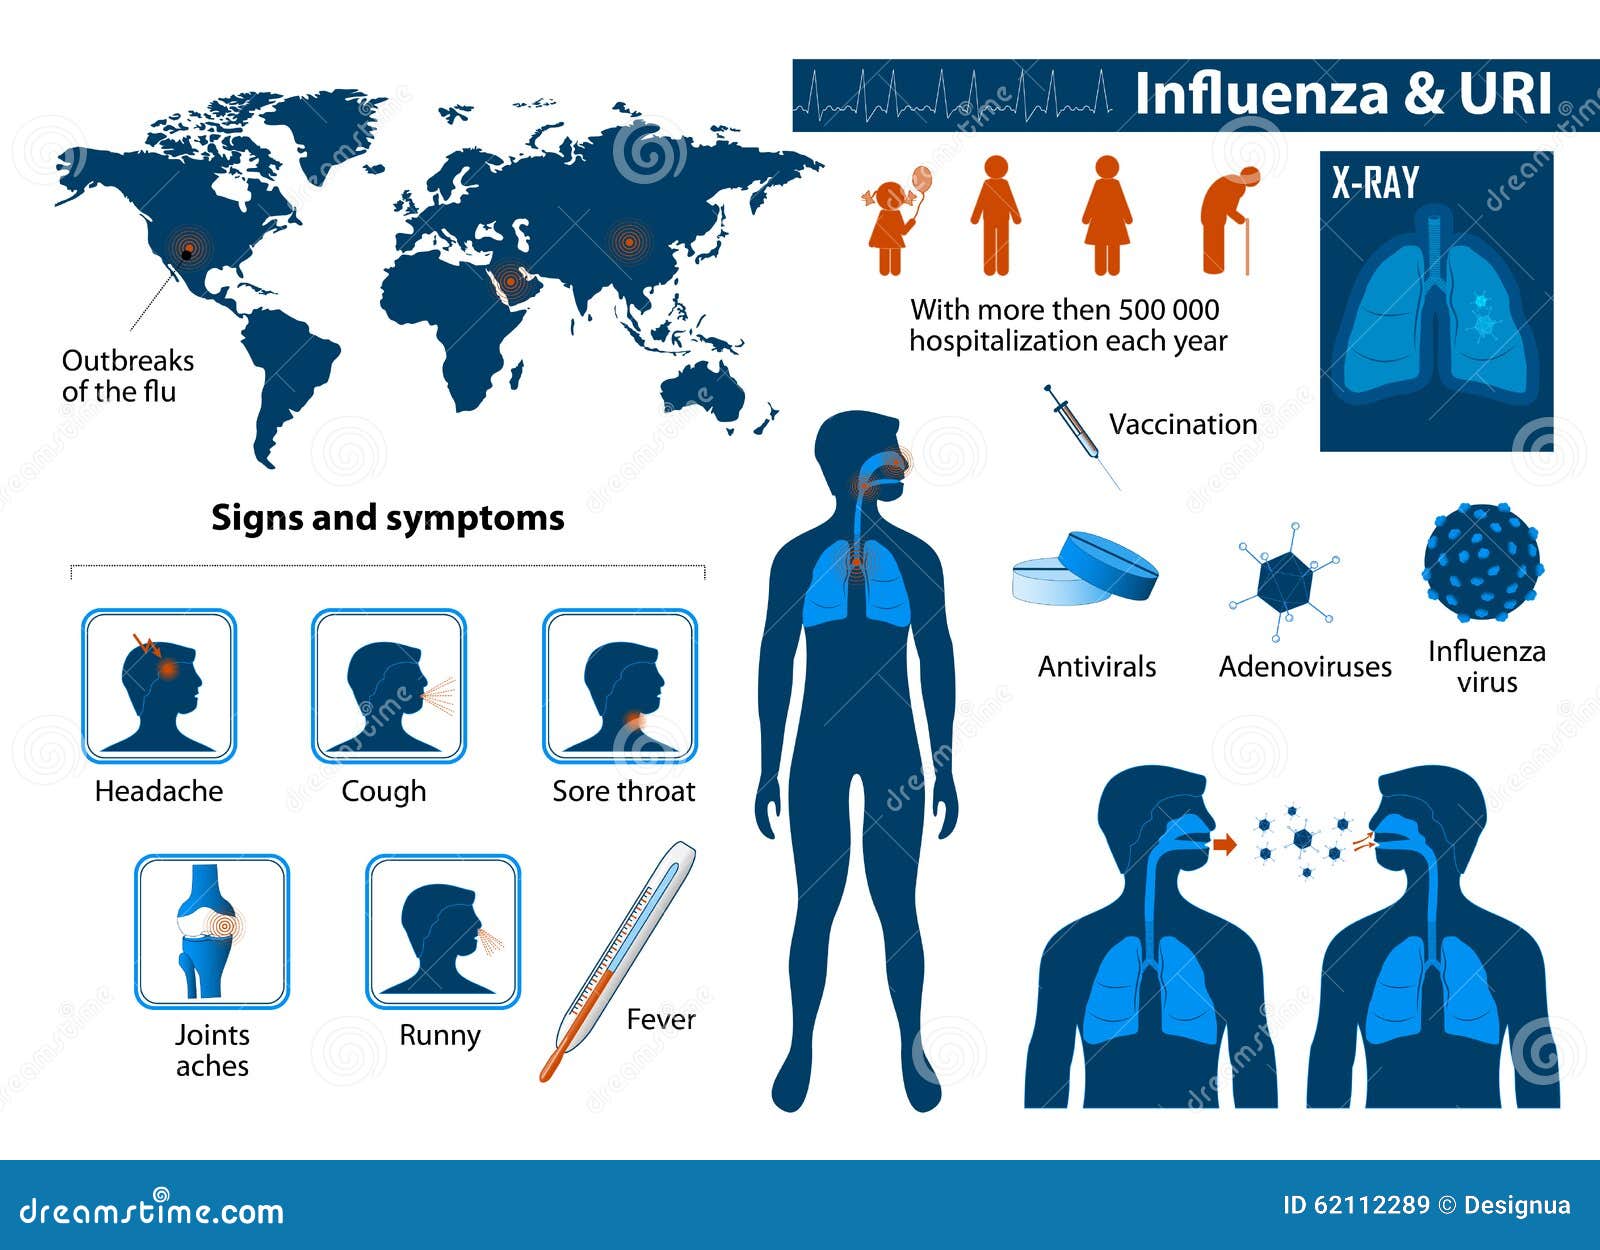 influenza & upper respiratory tract infections